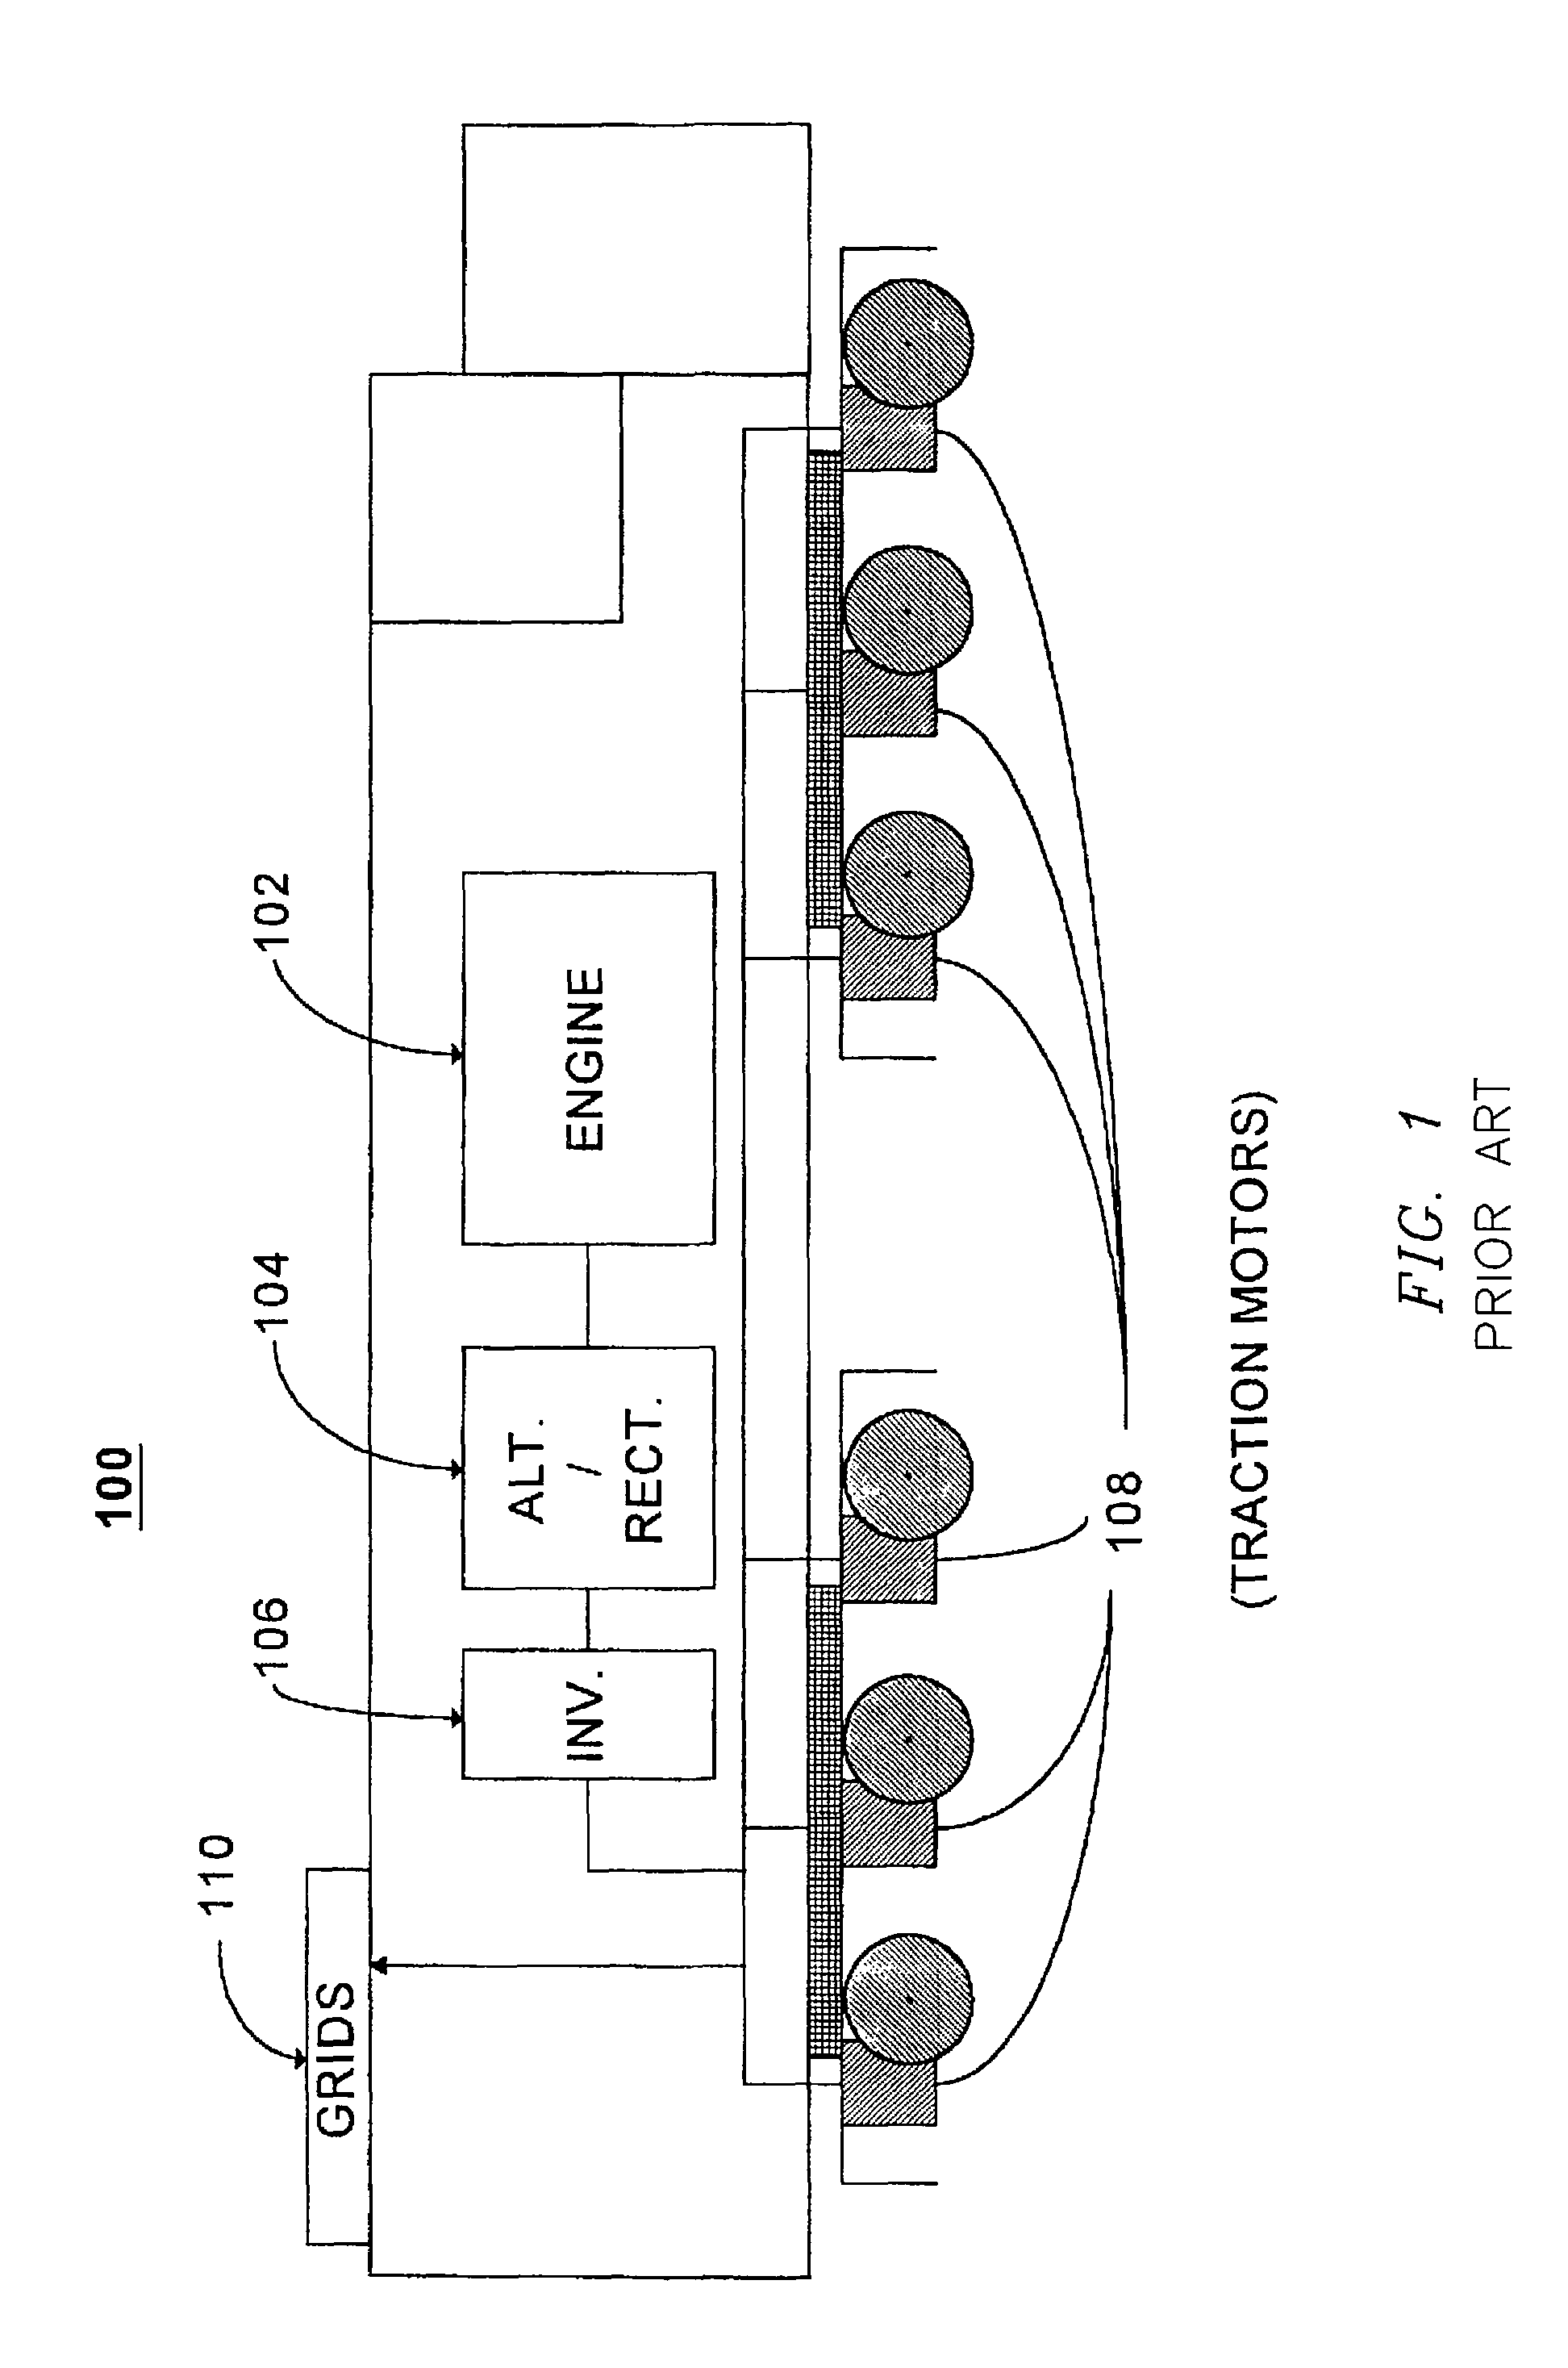 System and method for monitoring the effectiveness of a brake function in a powered system